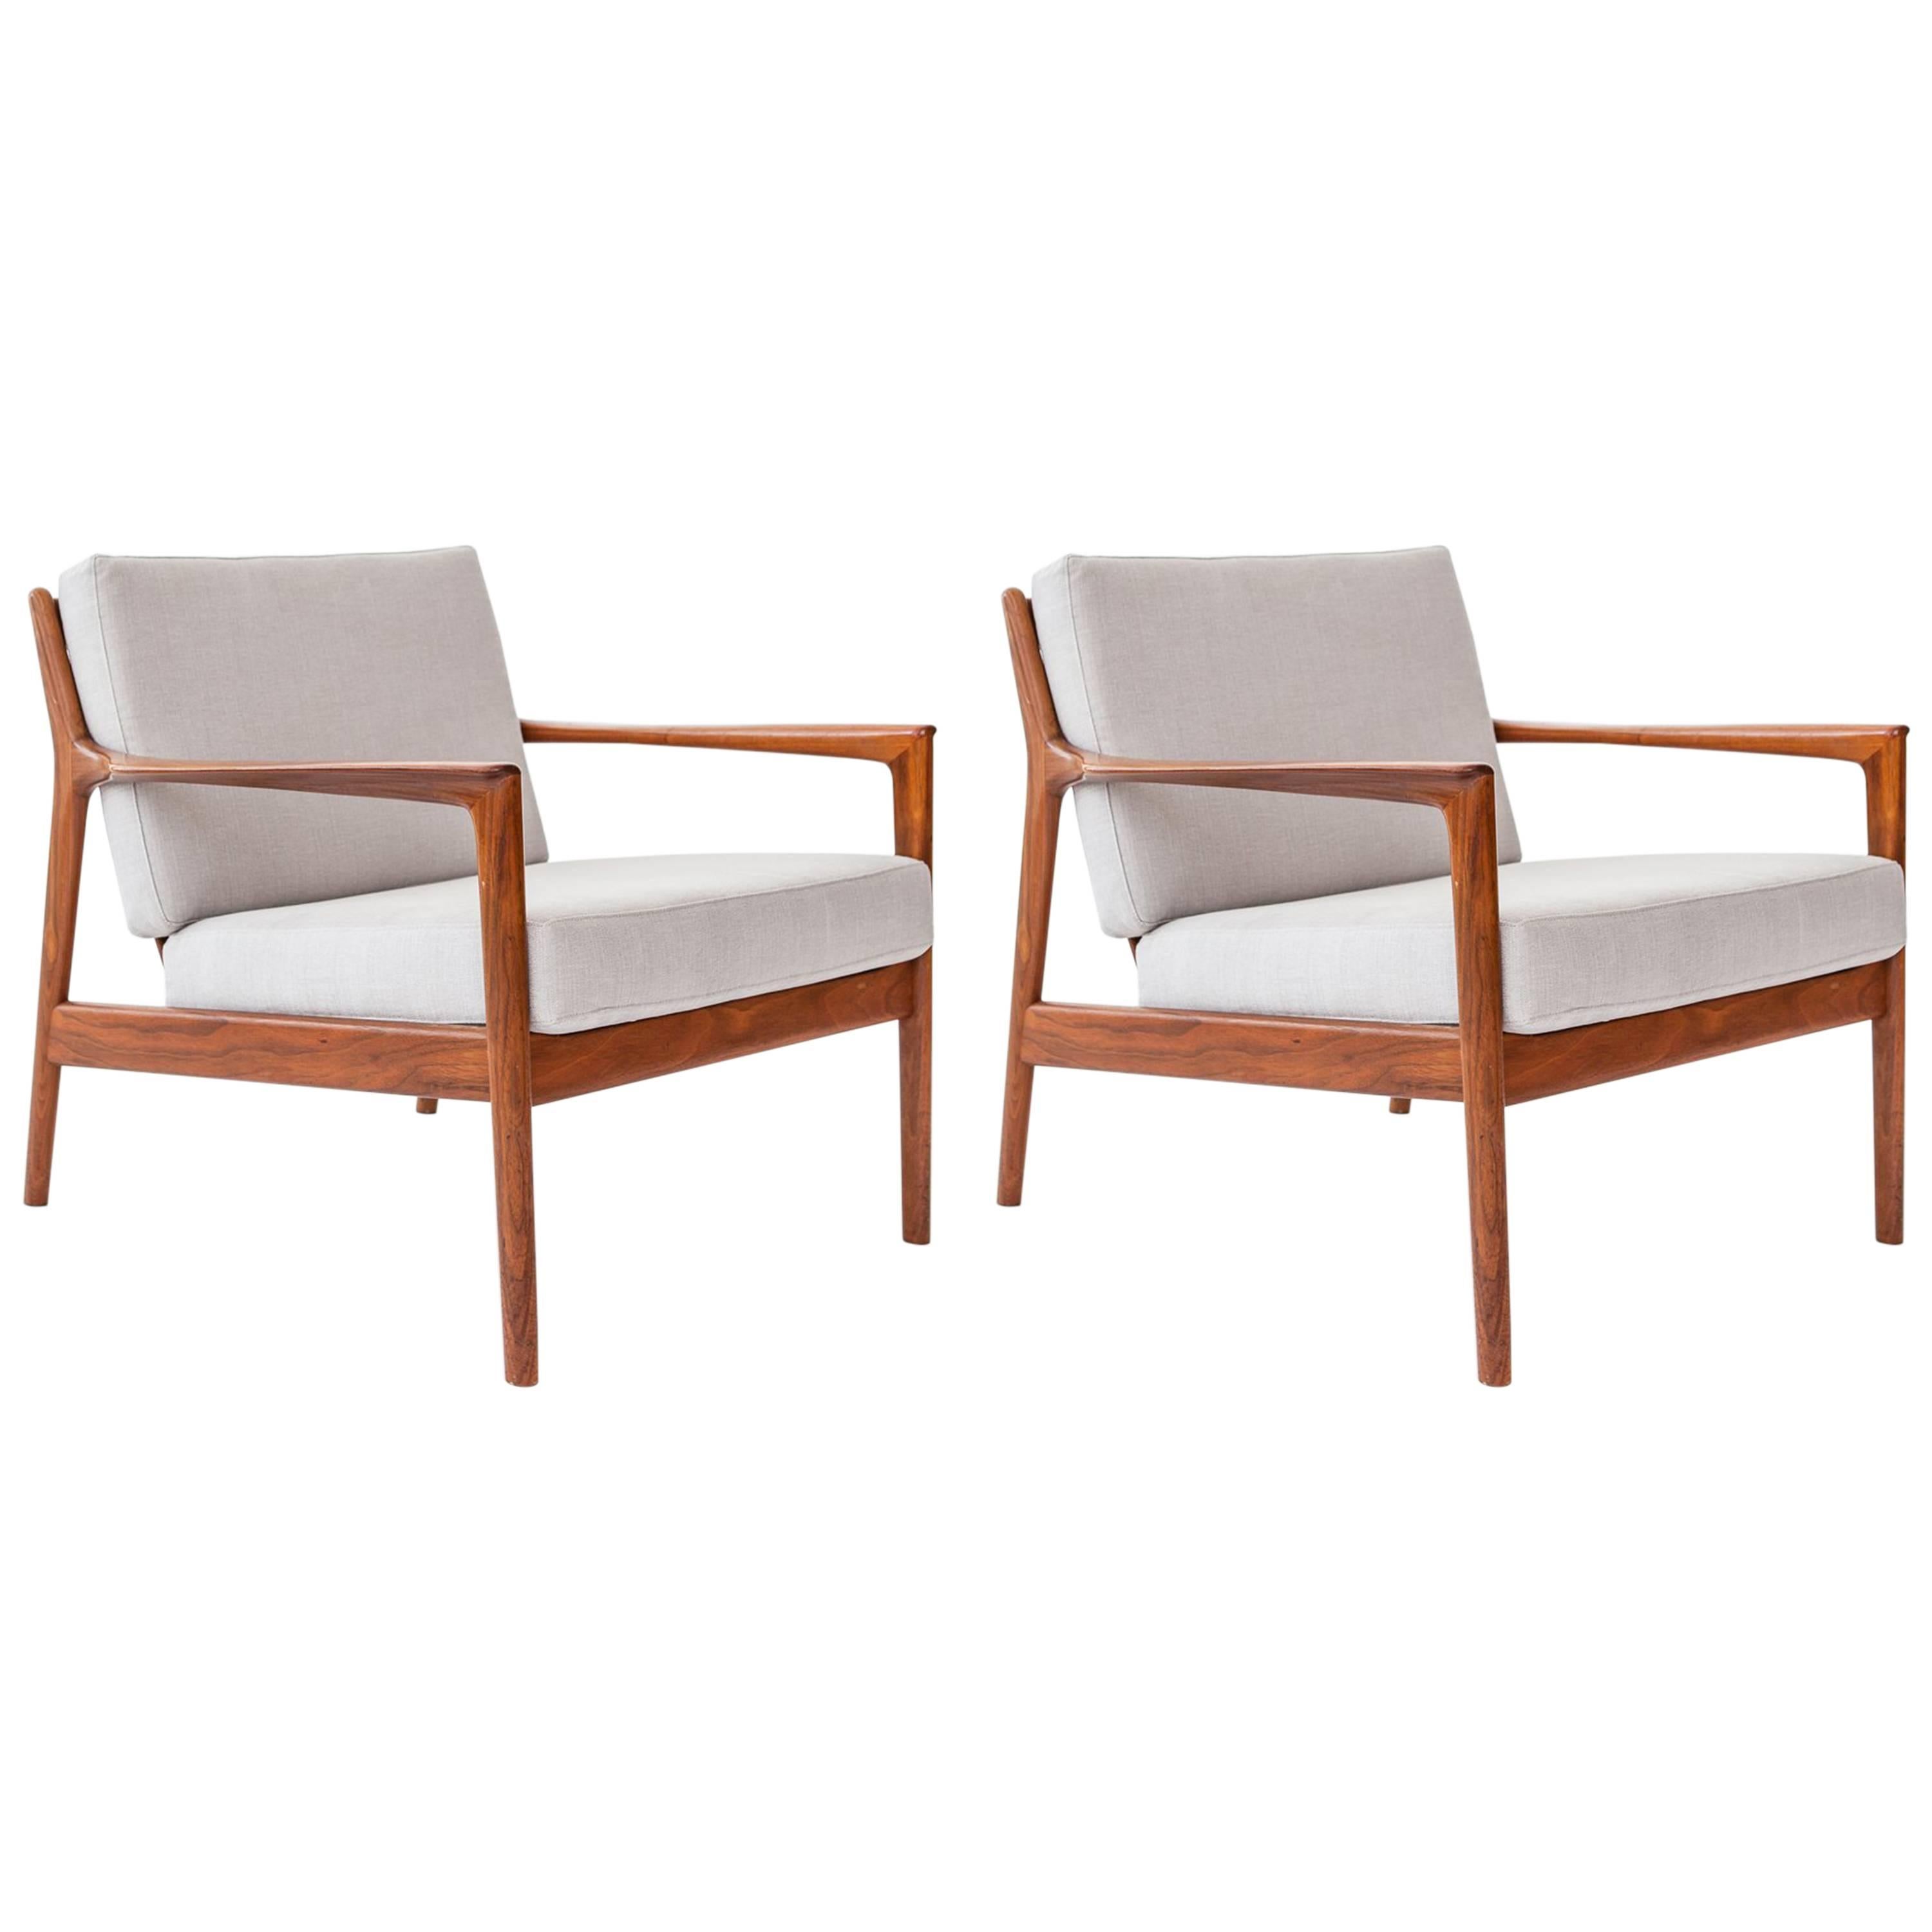 Pair of “USA -75” Lounge Chairs, in Walnut with Loose Cushions in Fabric